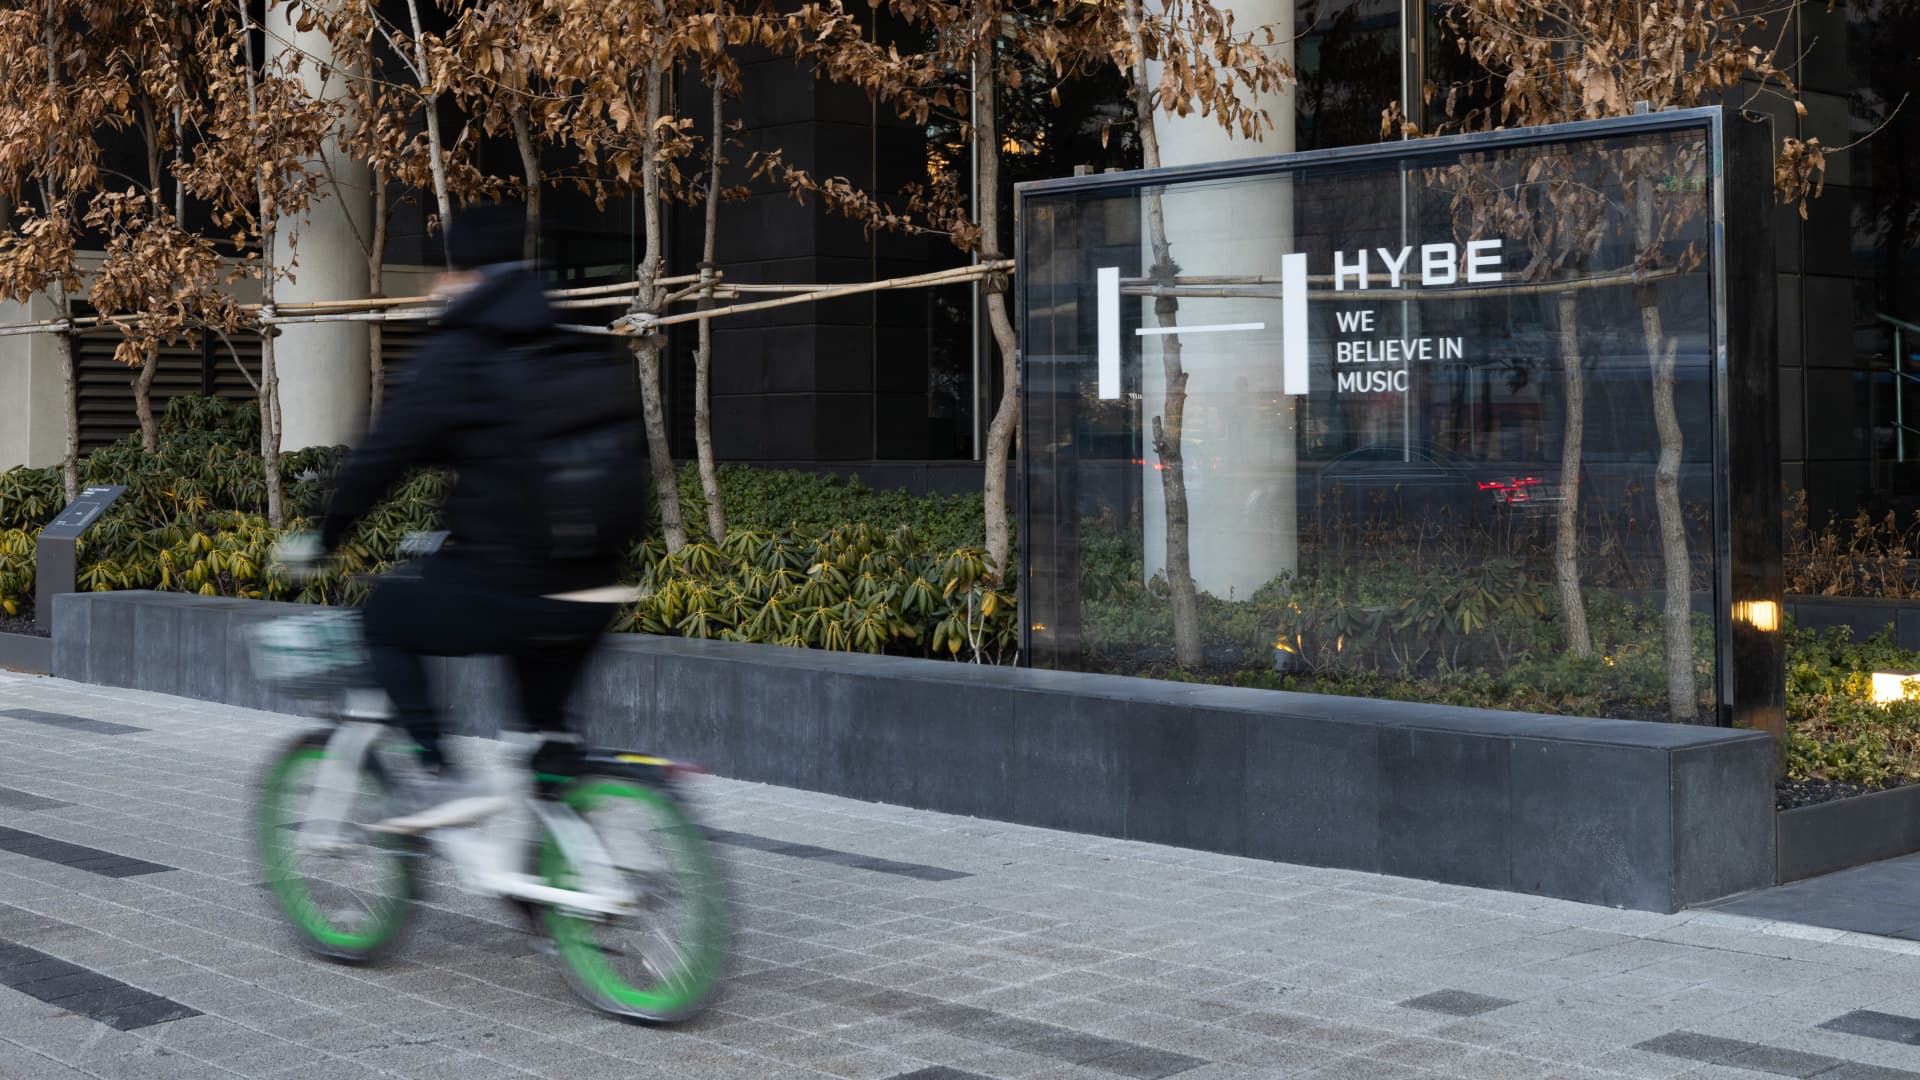 South Korea's largest K-pop agency Hybe accuses sublabel executives of breach of trust